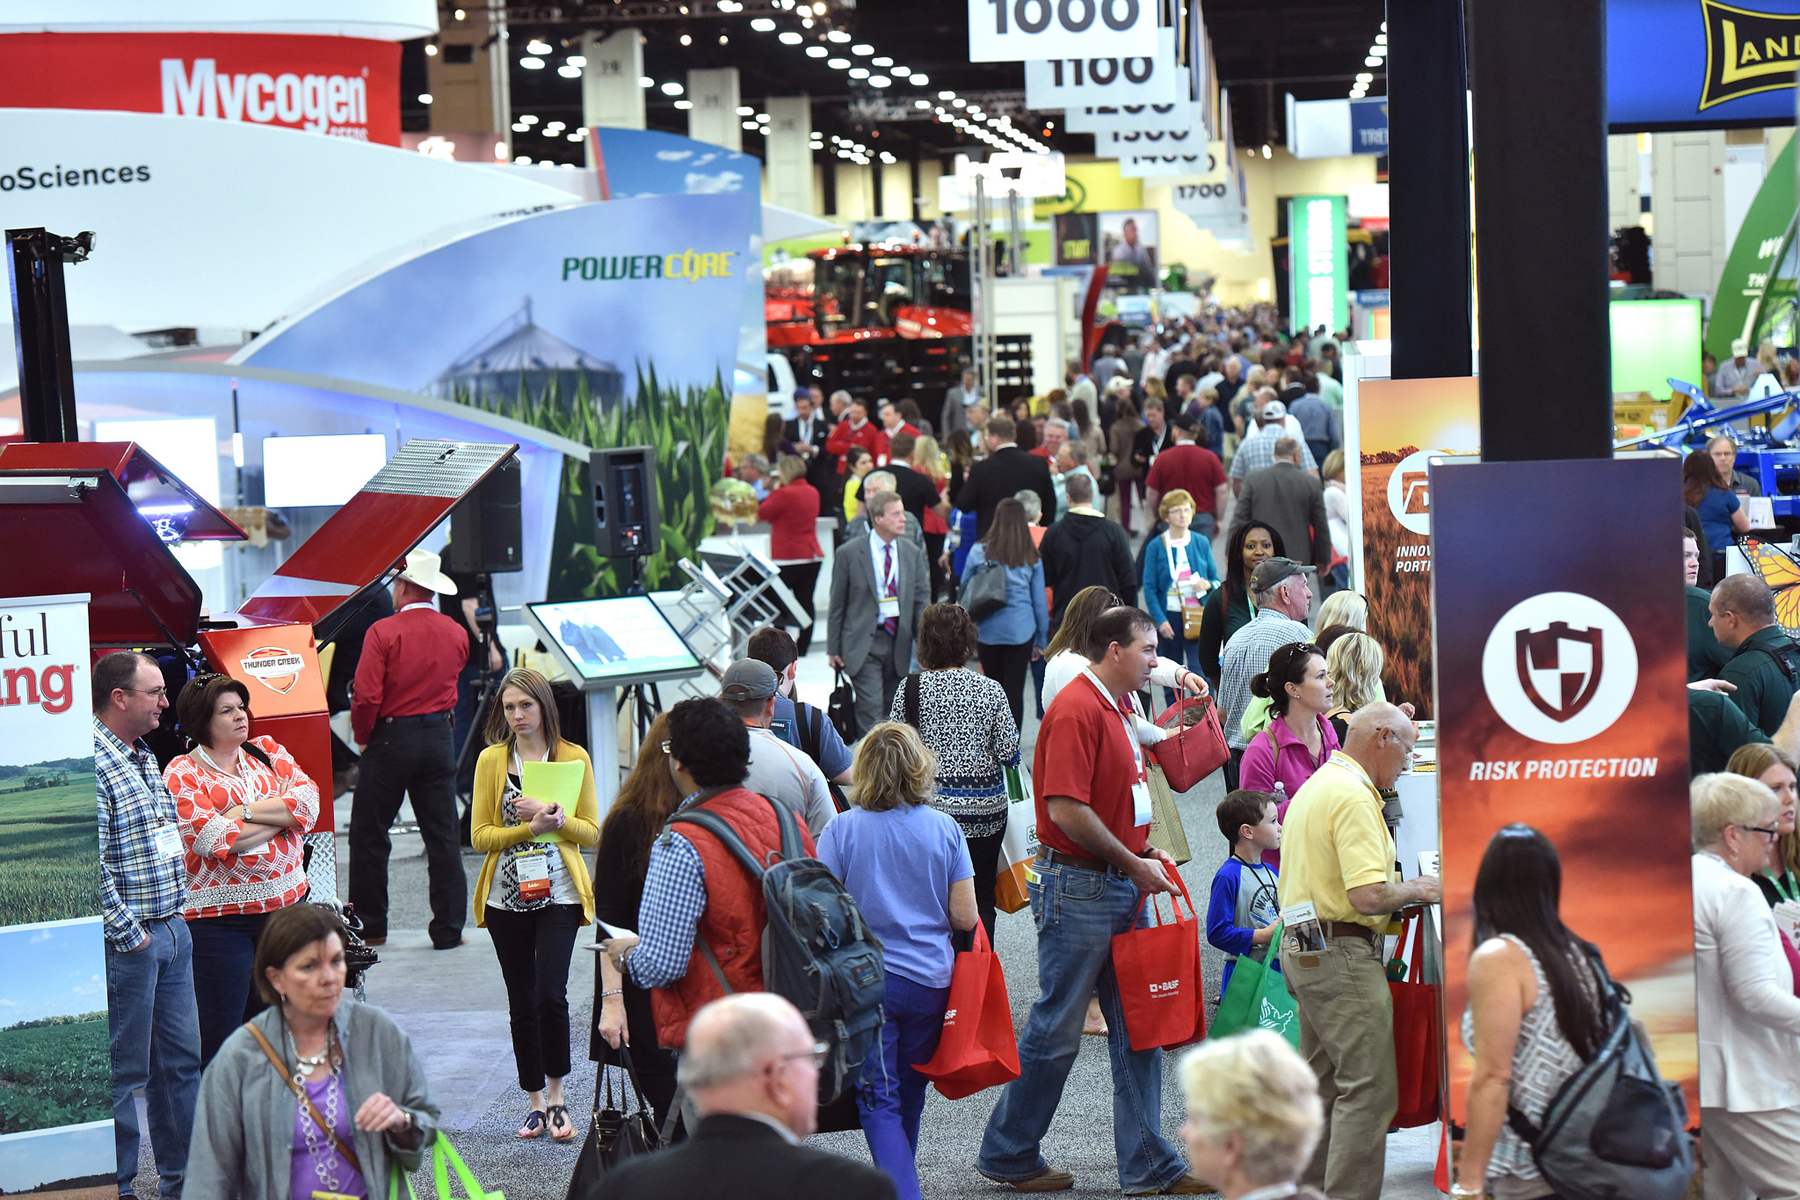 Commodity Classic Annual Convention Announces It Will Renew Its Partnership With AEM